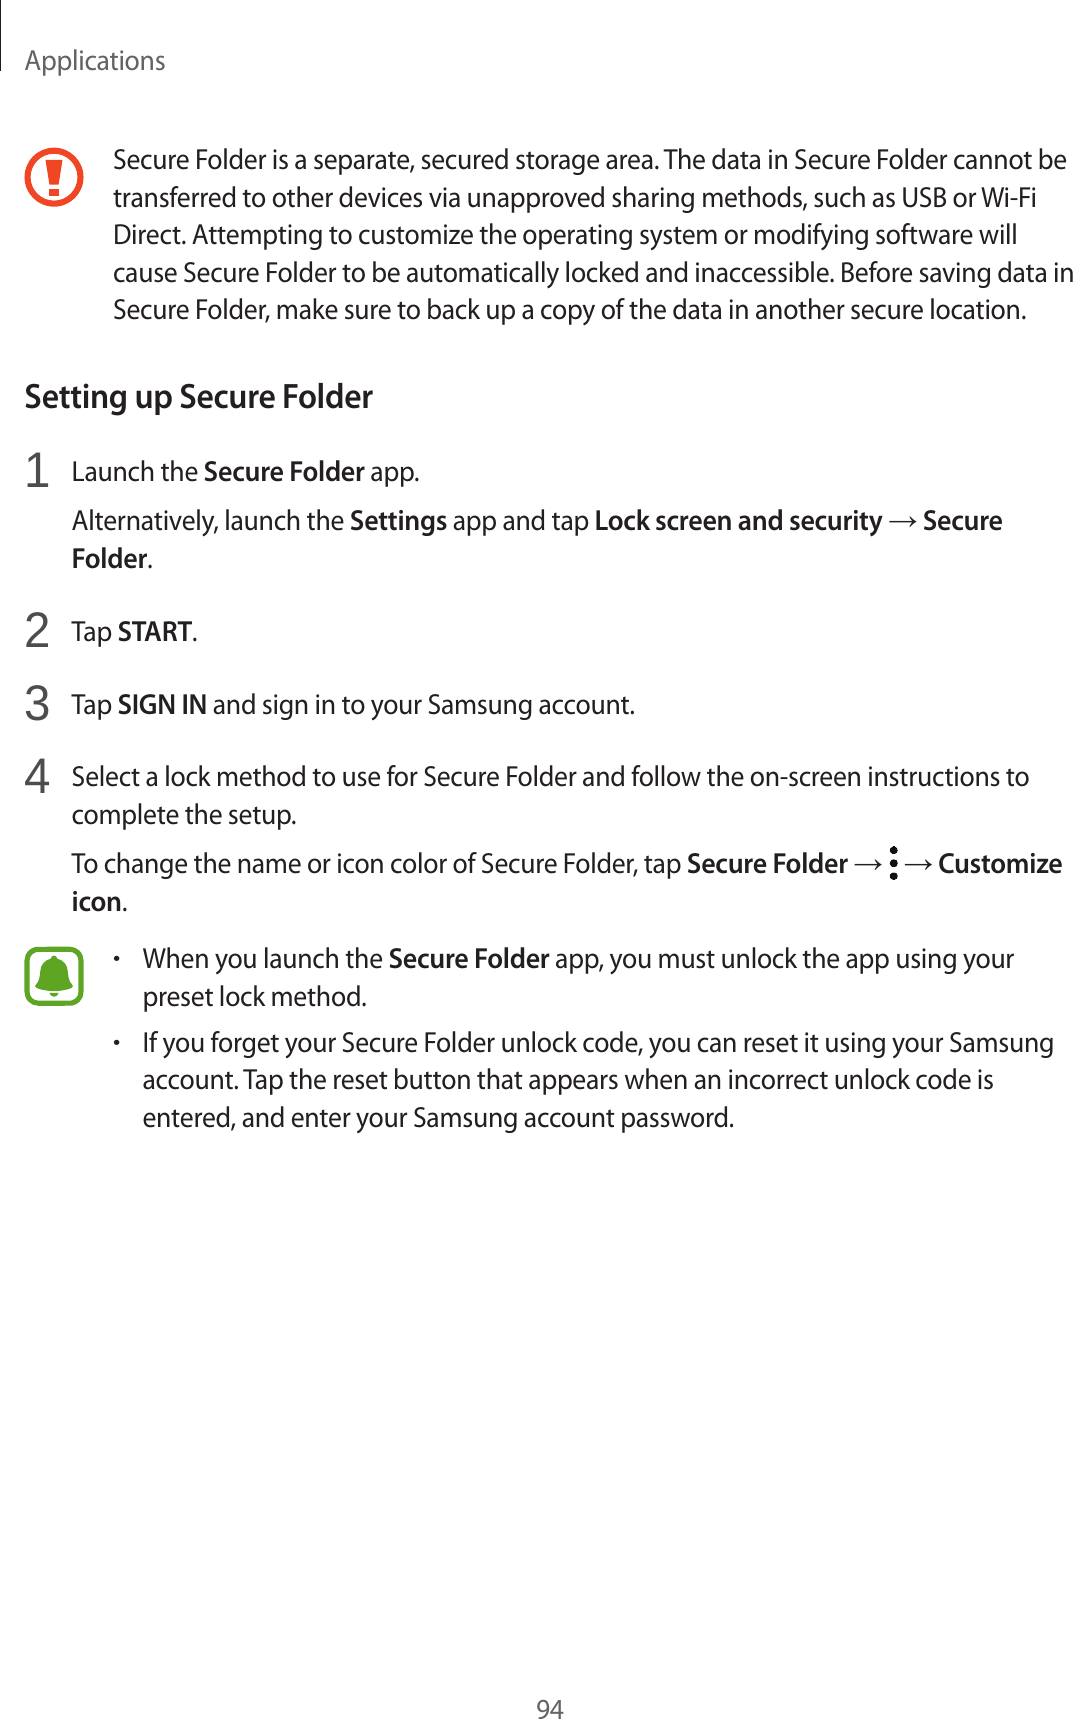 Applications94Secure Folder is a separate, secured storage area. The data in Secure Folder cannot be transferred to other devices via unapproved sharing methods, such as USB or Wi-Fi Direct. Attempting to customize the operating system or modifying software will cause Secure Folder to be automatically locked and inaccessible. Before saving data in Secure Folder, make sure to back up a copy of the data in another secure location.Setting up Secure Folder1  Launch the Secure Folder app.Alternatively, launch the Settings app and tap Lock screen and security → Secure Folder.2  Tap START.3  Tap SIGN IN and sign in to your Samsung account.4  Select a lock method to use for Secure Folder and follow the on-screen instructions to complete the setup.To change the name or icon color of Secure Folder, tap Secure Folder →   → Customize icon.•When you launch the Secure Folder app, you must unlock the app using your preset lock method.•If you forget your Secure Folder unlock code, you can reset it using your Samsung account. Tap the reset button that appears when an incorrect unlock code is entered, and enter your Samsung account password.